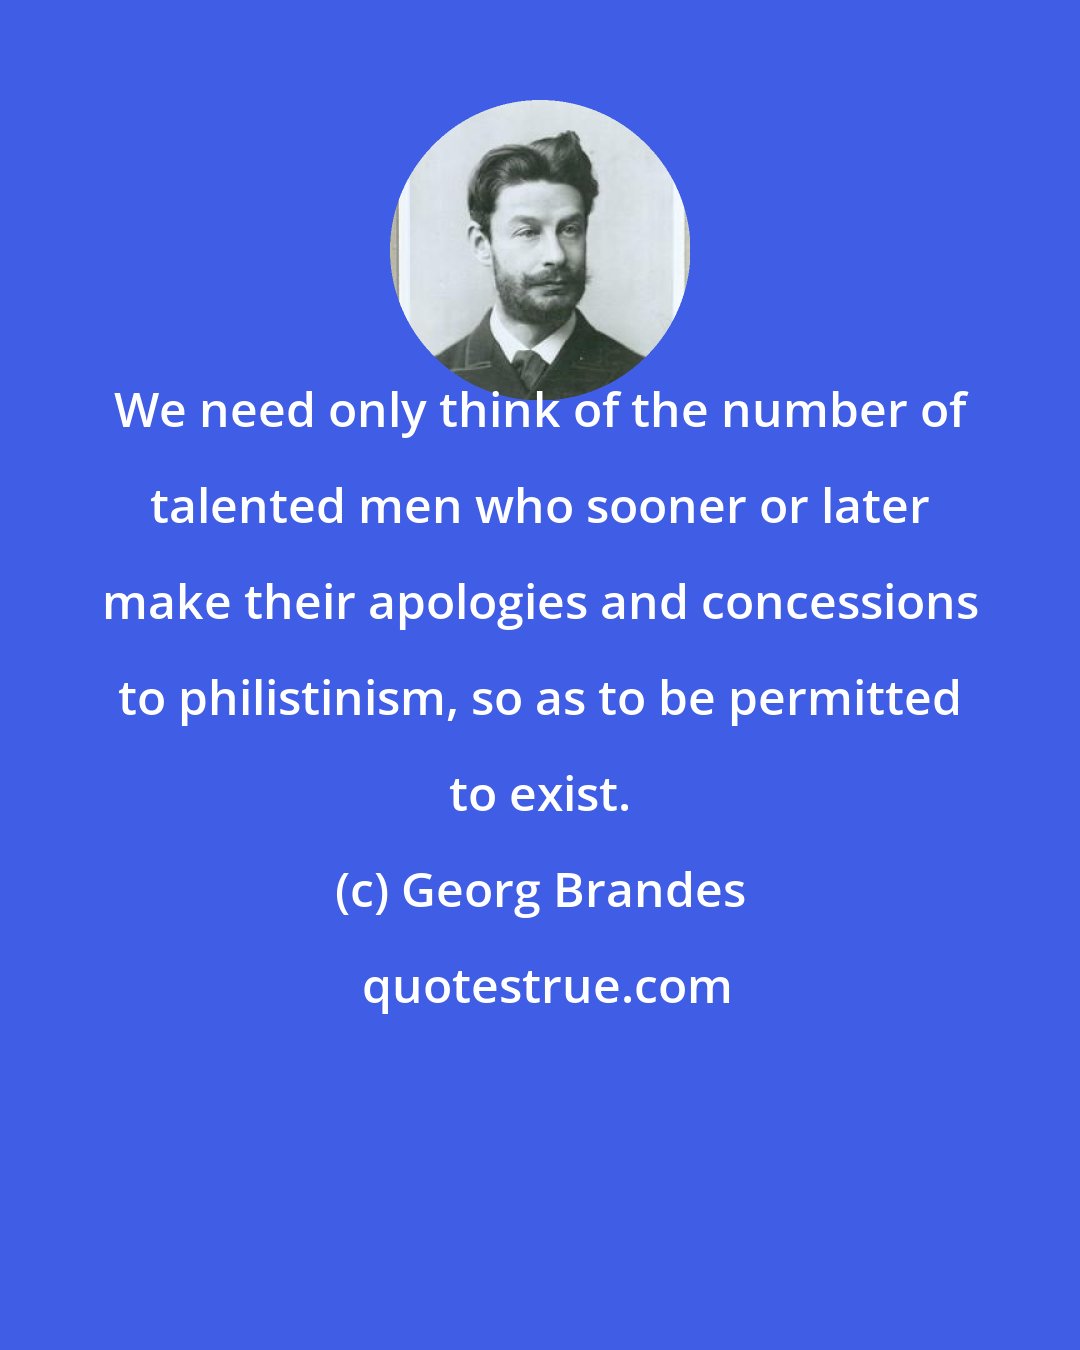 Georg Brandes: We need only think of the number of talented men who sooner or later make their apologies and concessions to philistinism, so as to be permitted to exist.